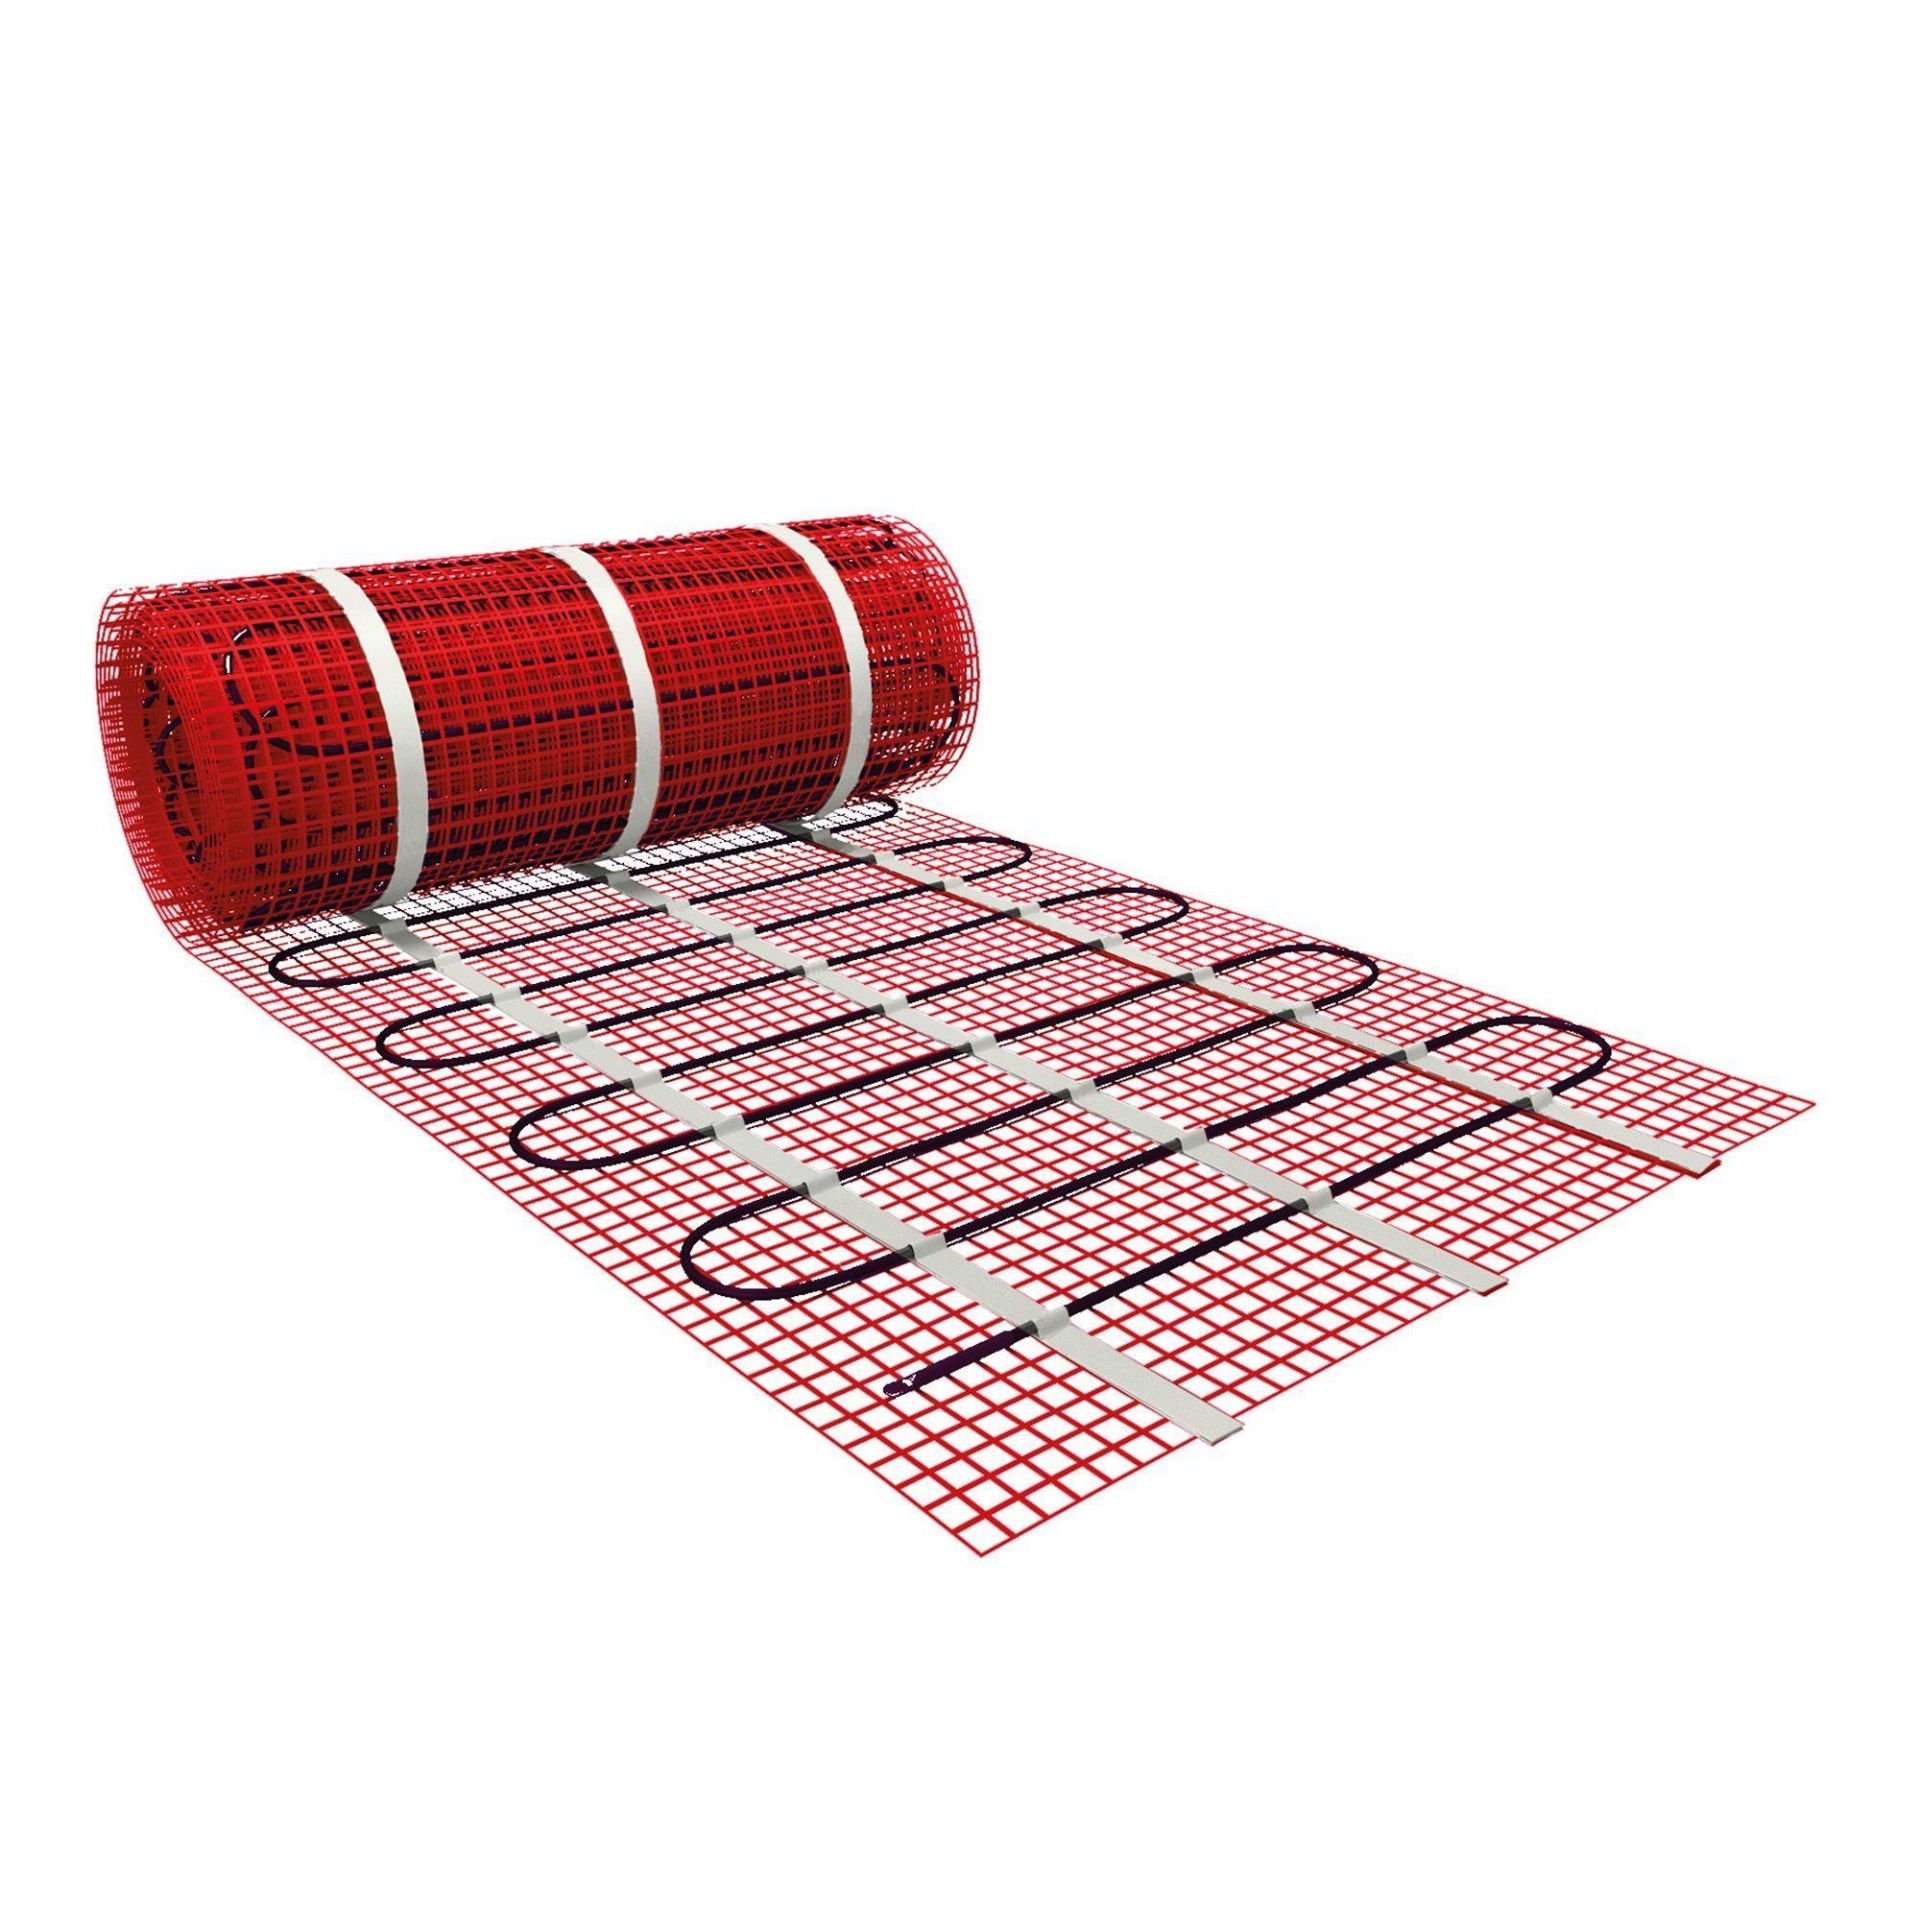 Klima 1050W Underfloor Heating Mat - R13a.7. An easy to install heating mat with a thickness of just